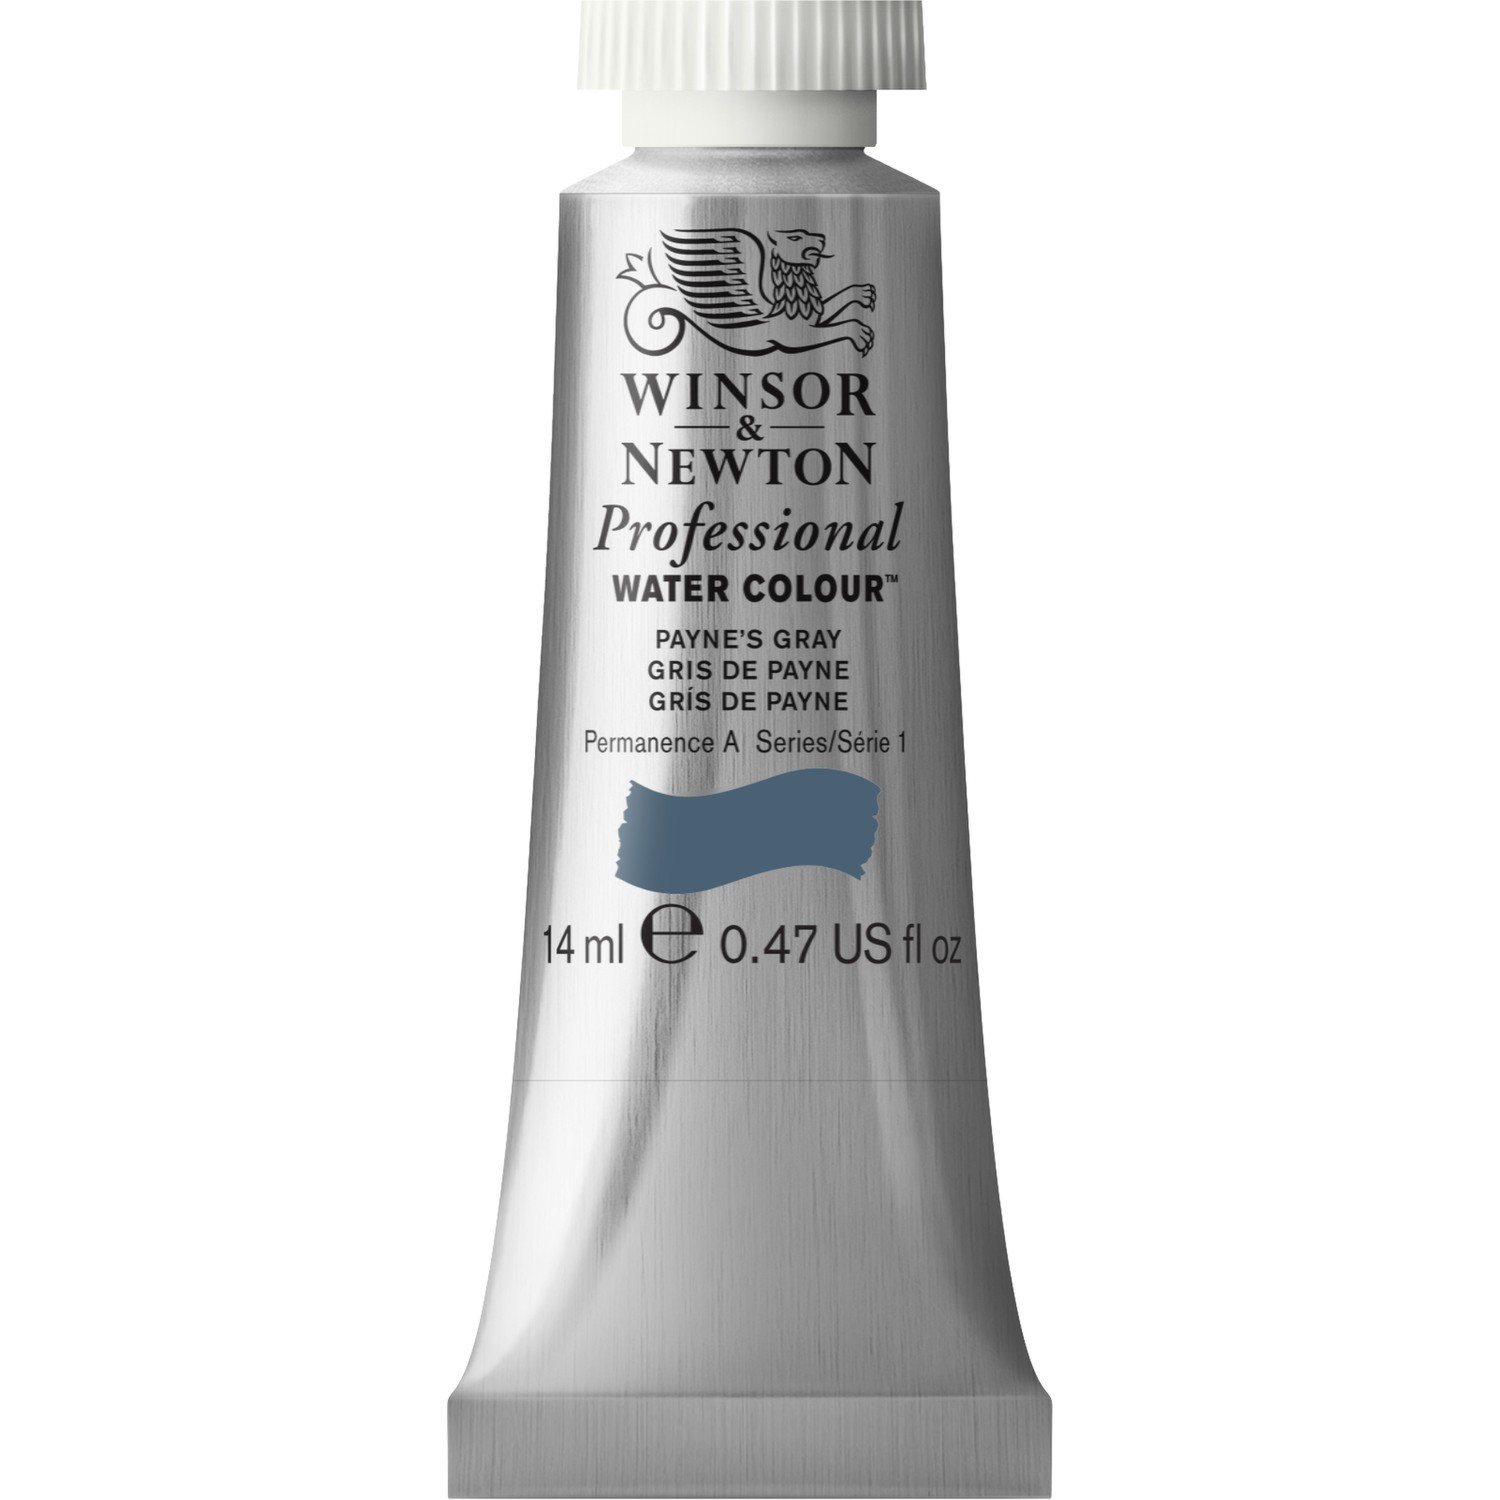 Winsor and Newton 14ml Professional Watercolour Paint - Paynes Grey Image 1